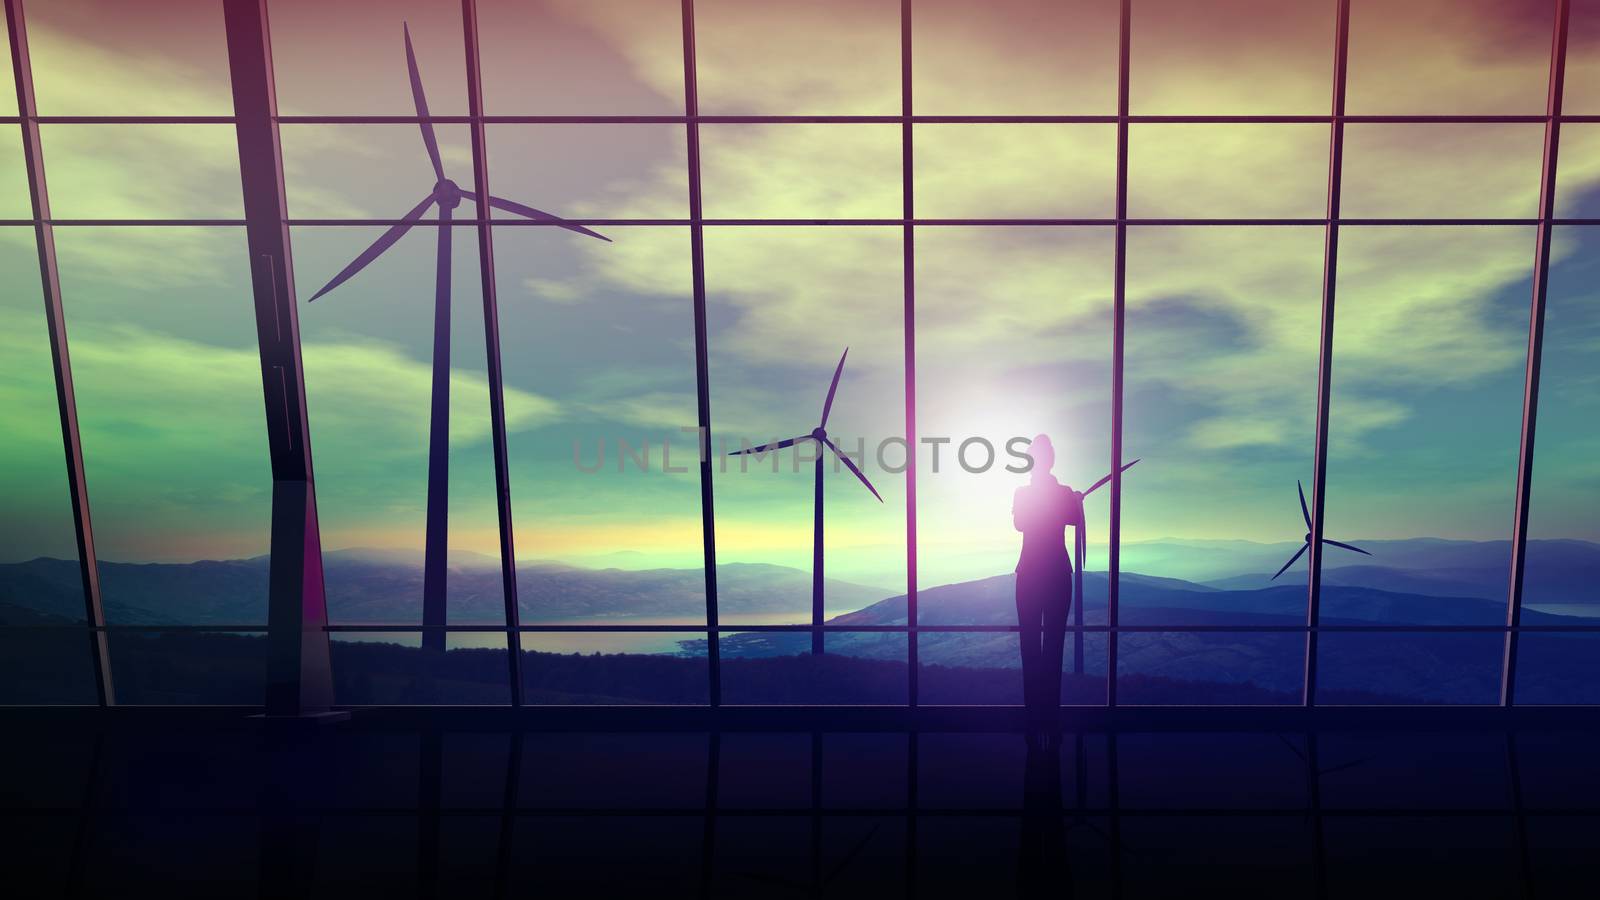 In a spacious office against the window, a business woman looks at wind farms. by ConceptCafe